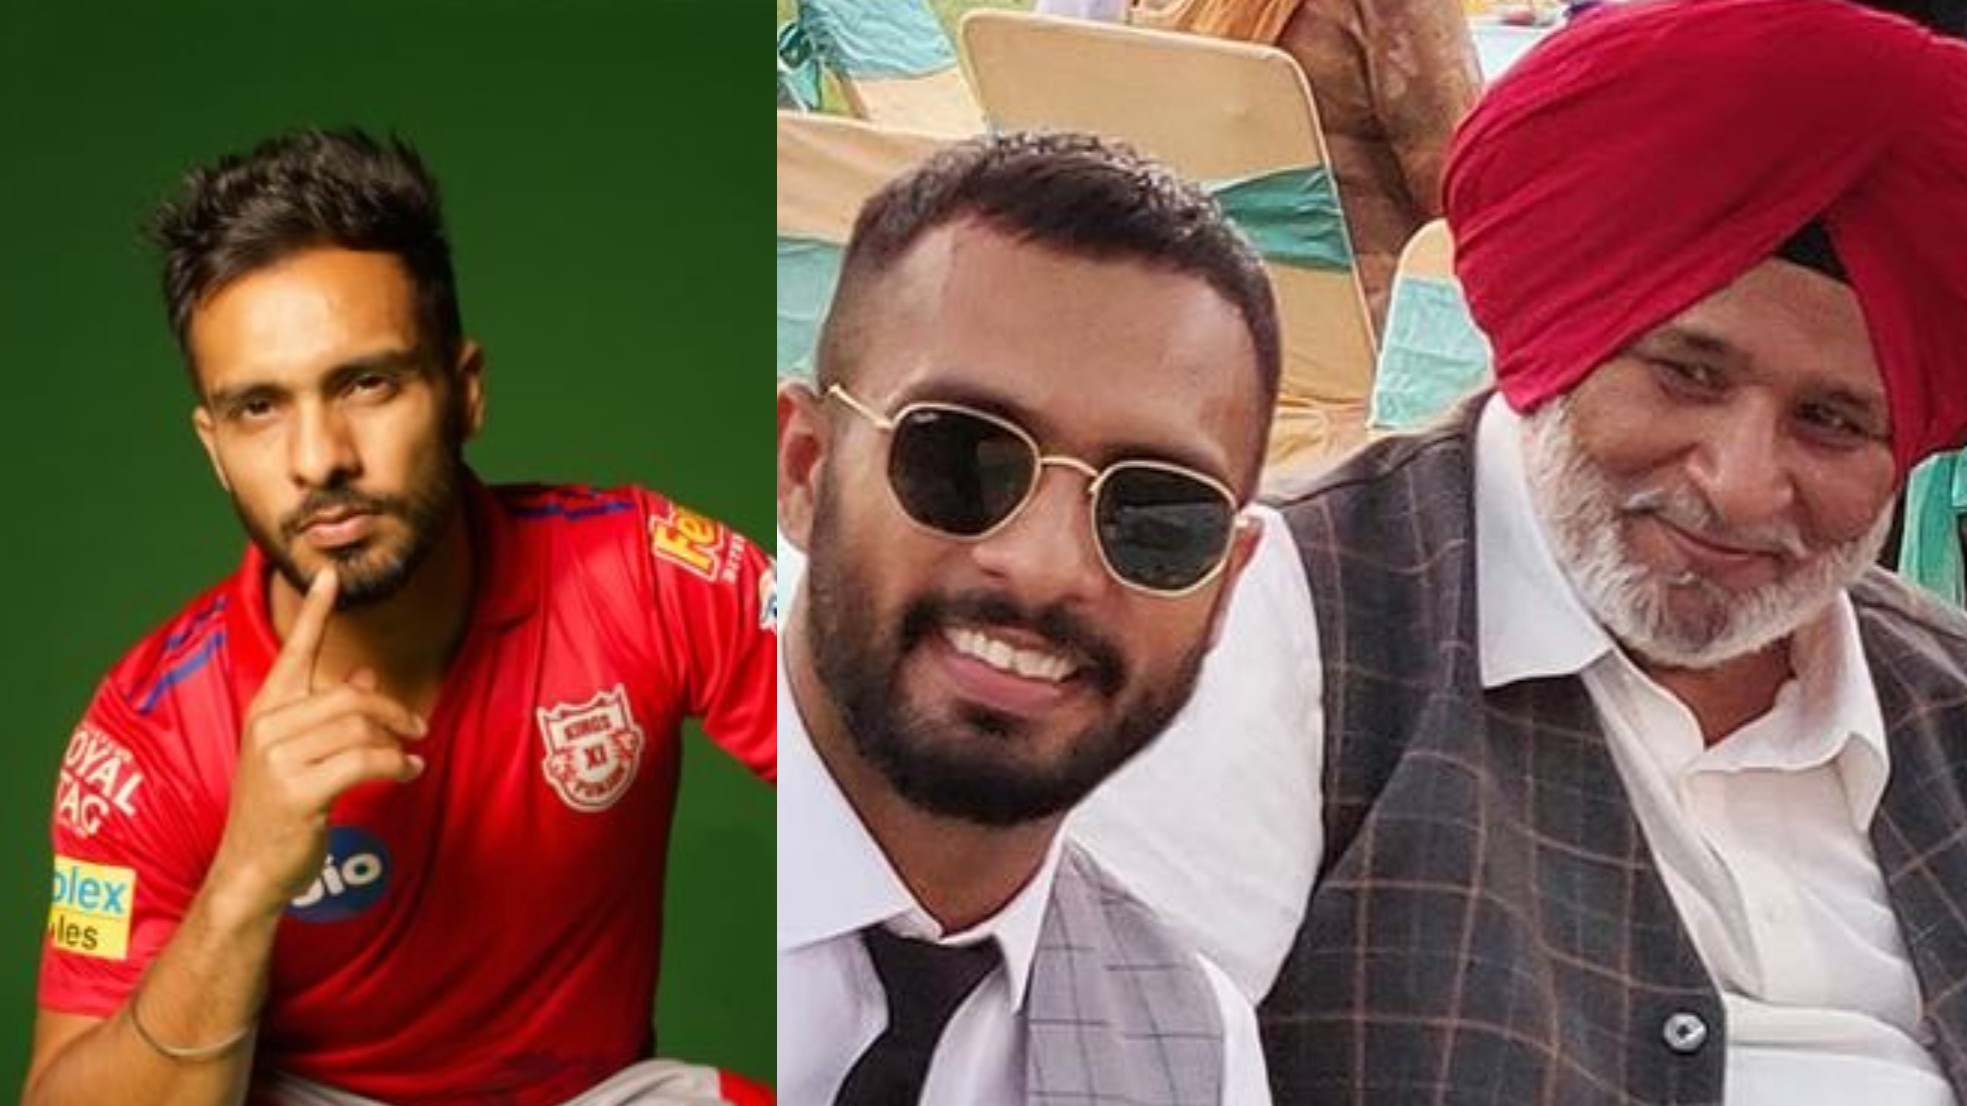 IPL 2020: Mandeep Singh plays for KXIP despite his father's death; fans laud his courage